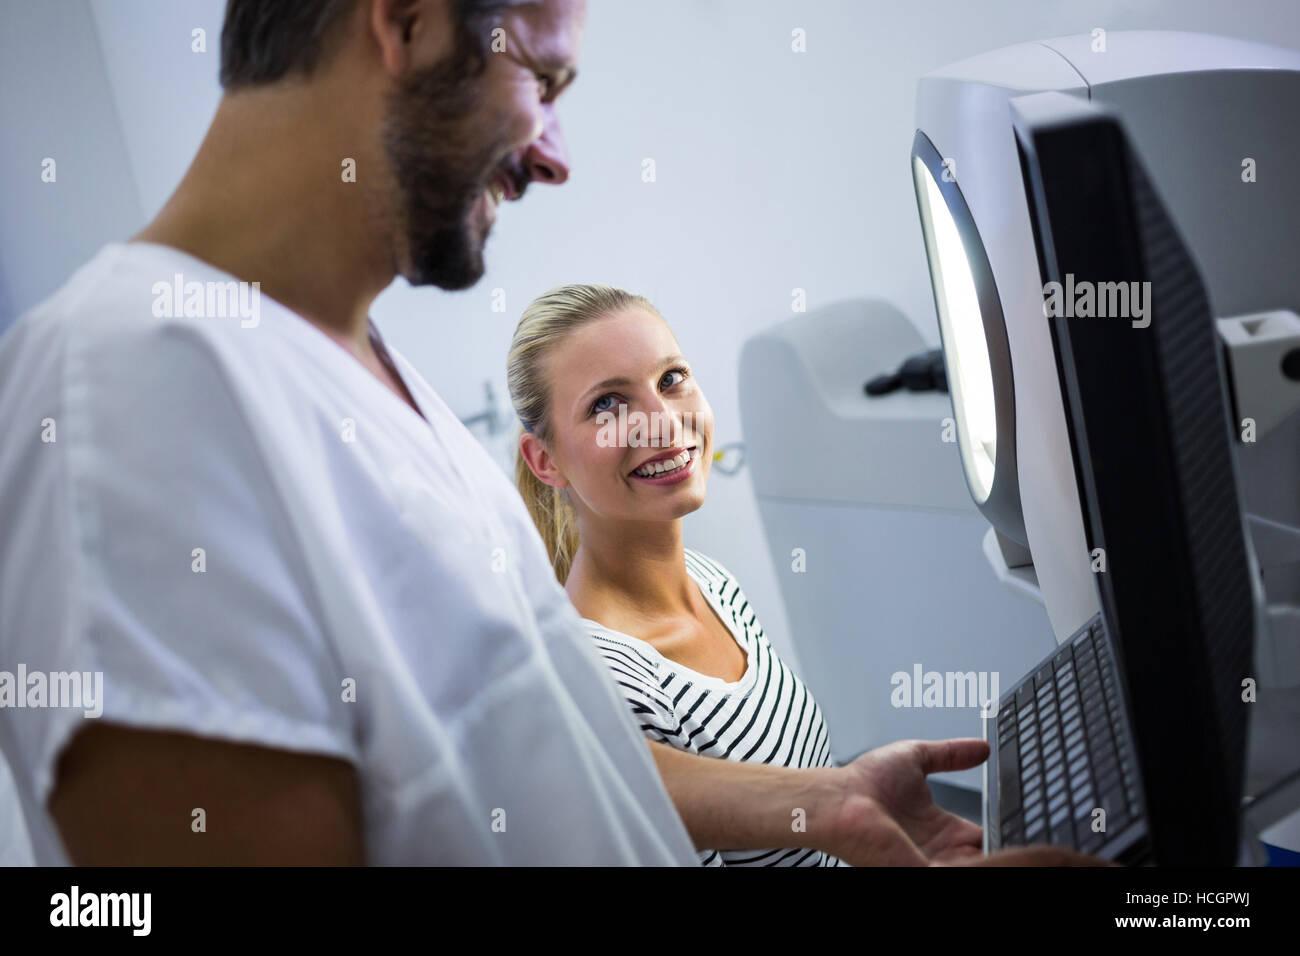 Woman discussing with dermatologist Stock Photo